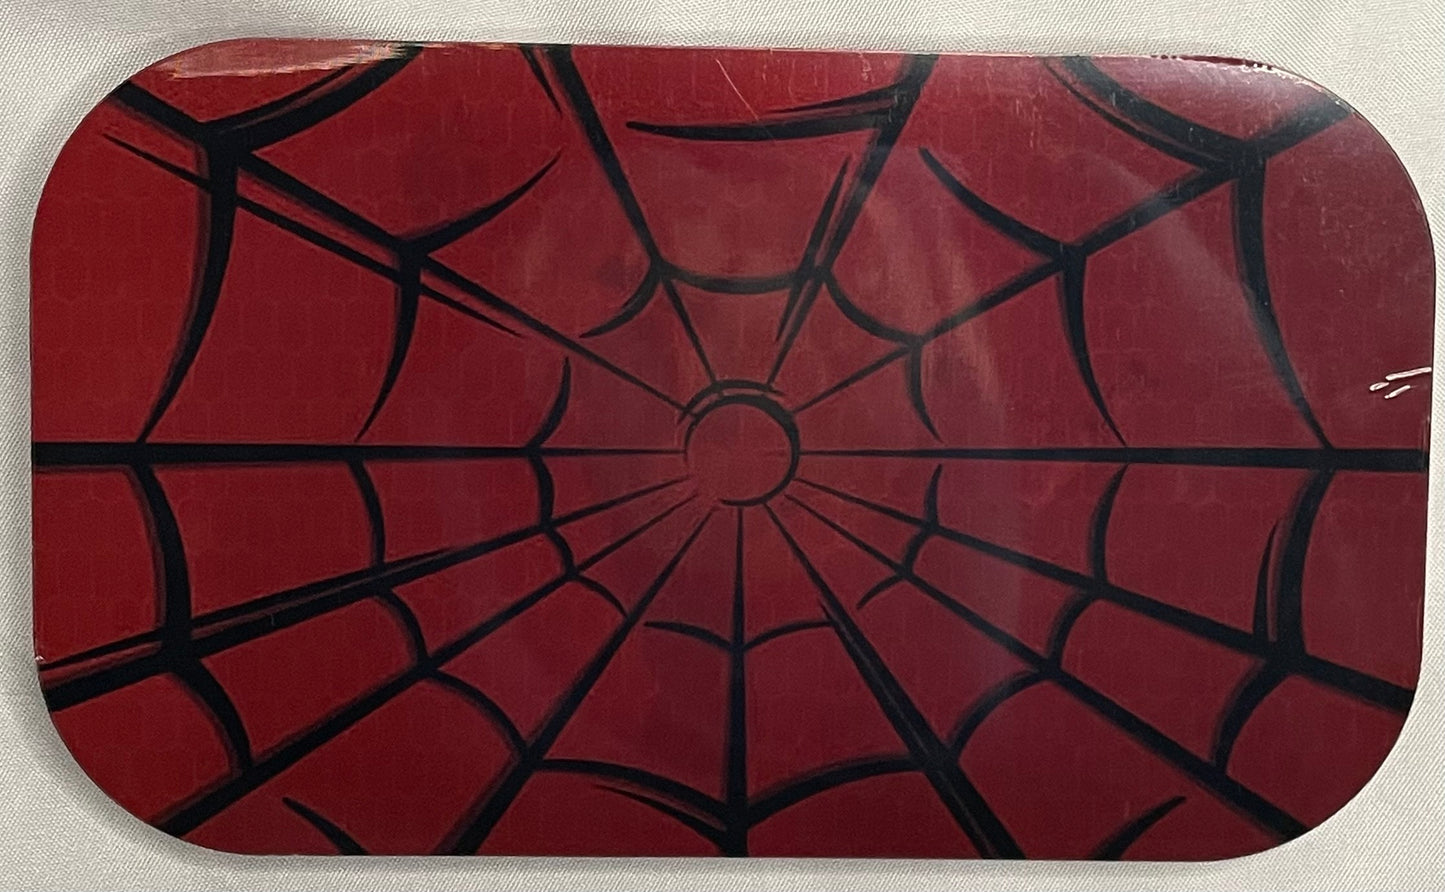 SPIDER-MAN METAL ROLLING TRAY WITH MAGNETIC 3D COVER 7X11'